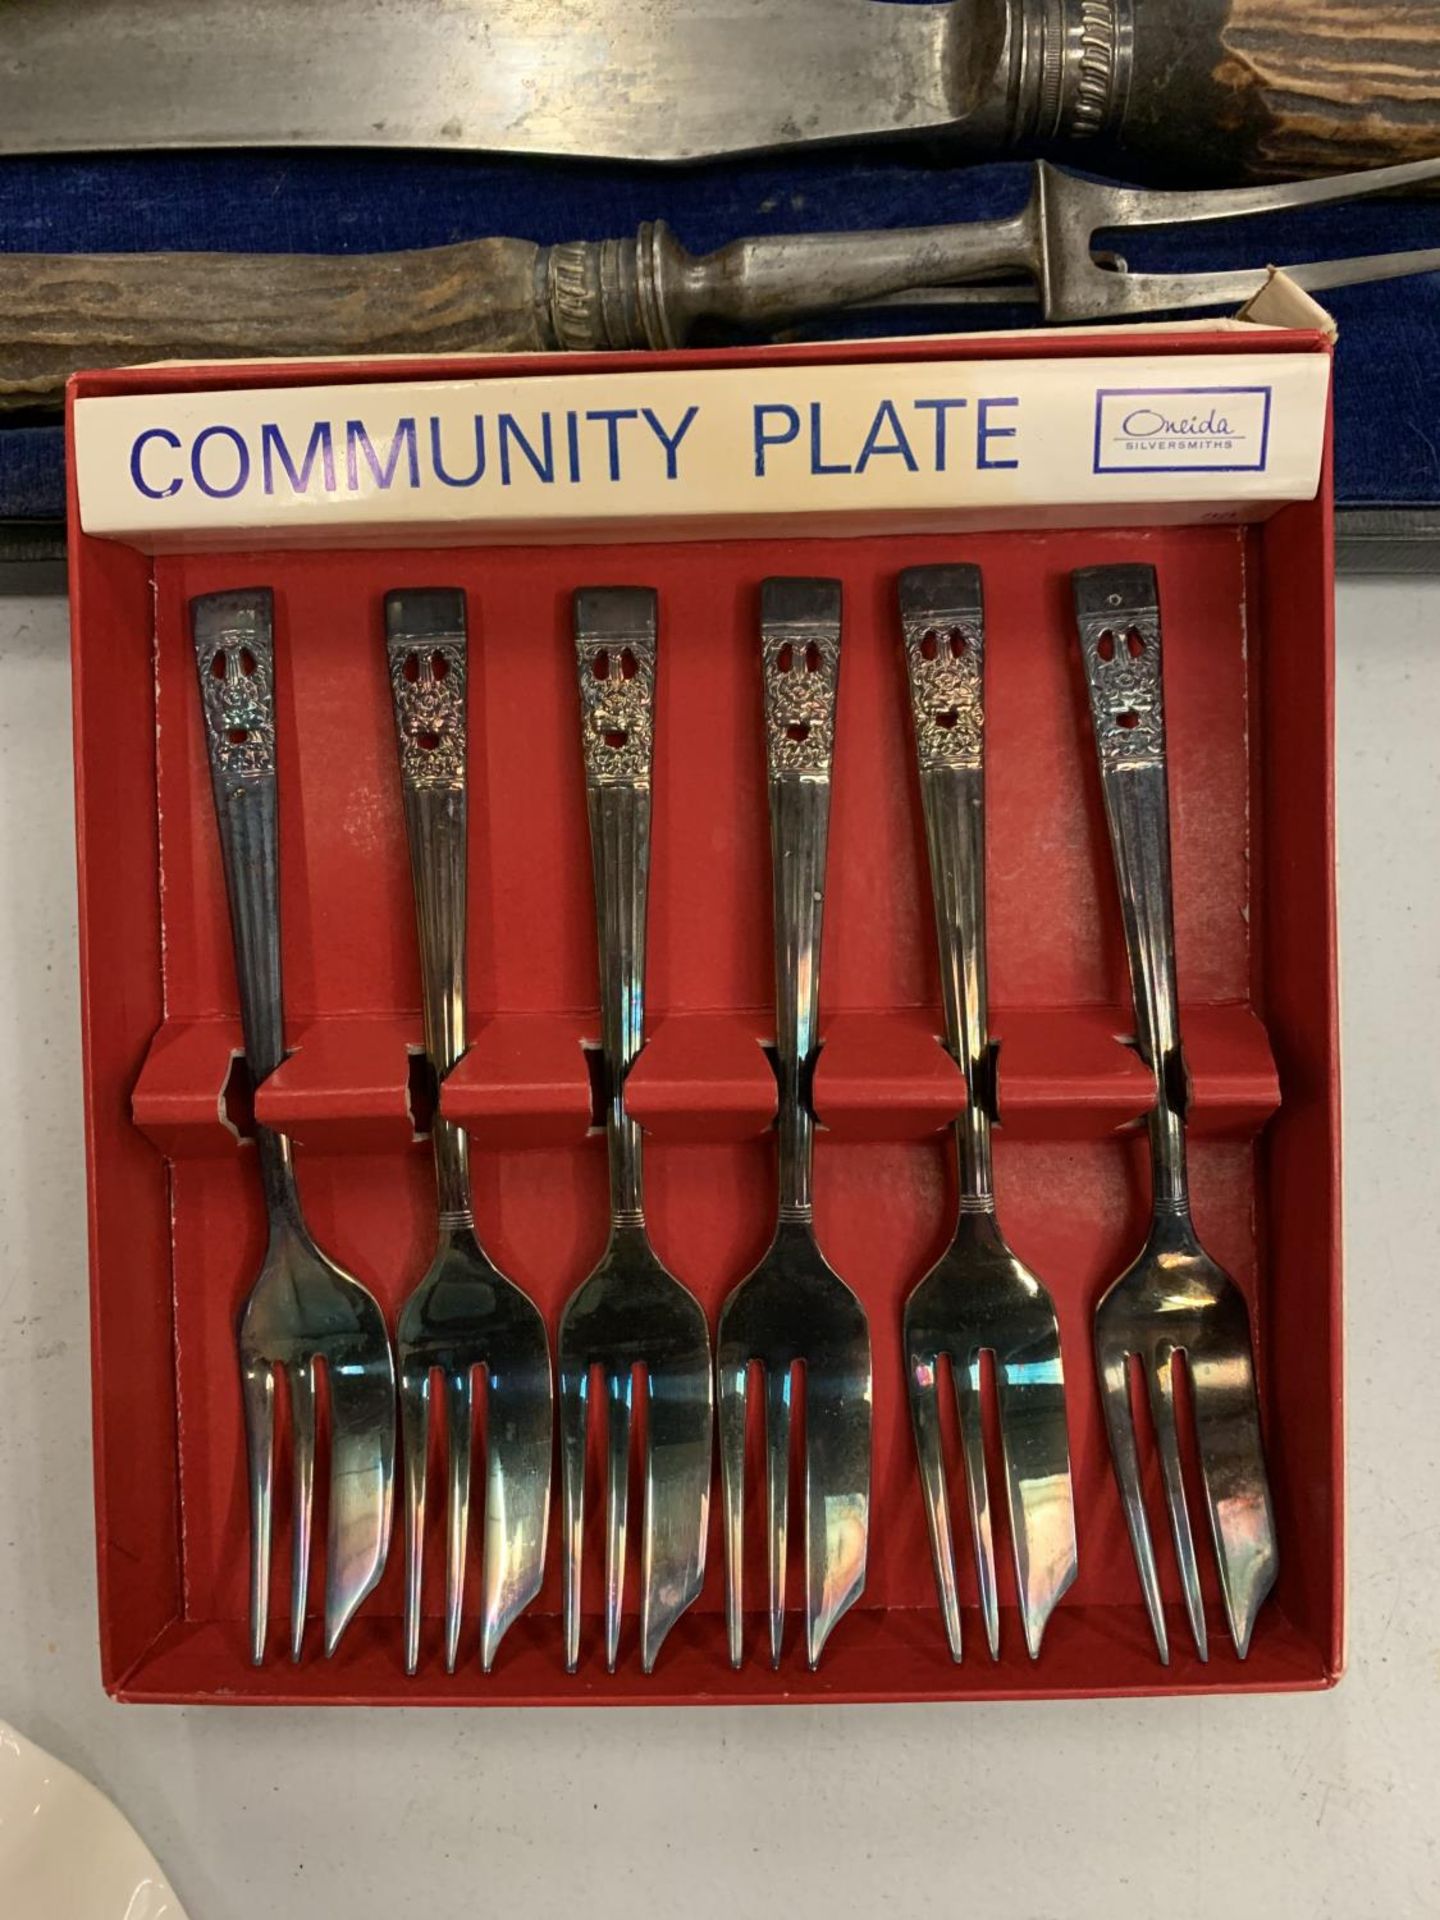 A VINTAGE BOXED MEAT CARVING SET AND SIX BOXED COMMUNITY PLATE CAKE FORKS - Image 2 of 3